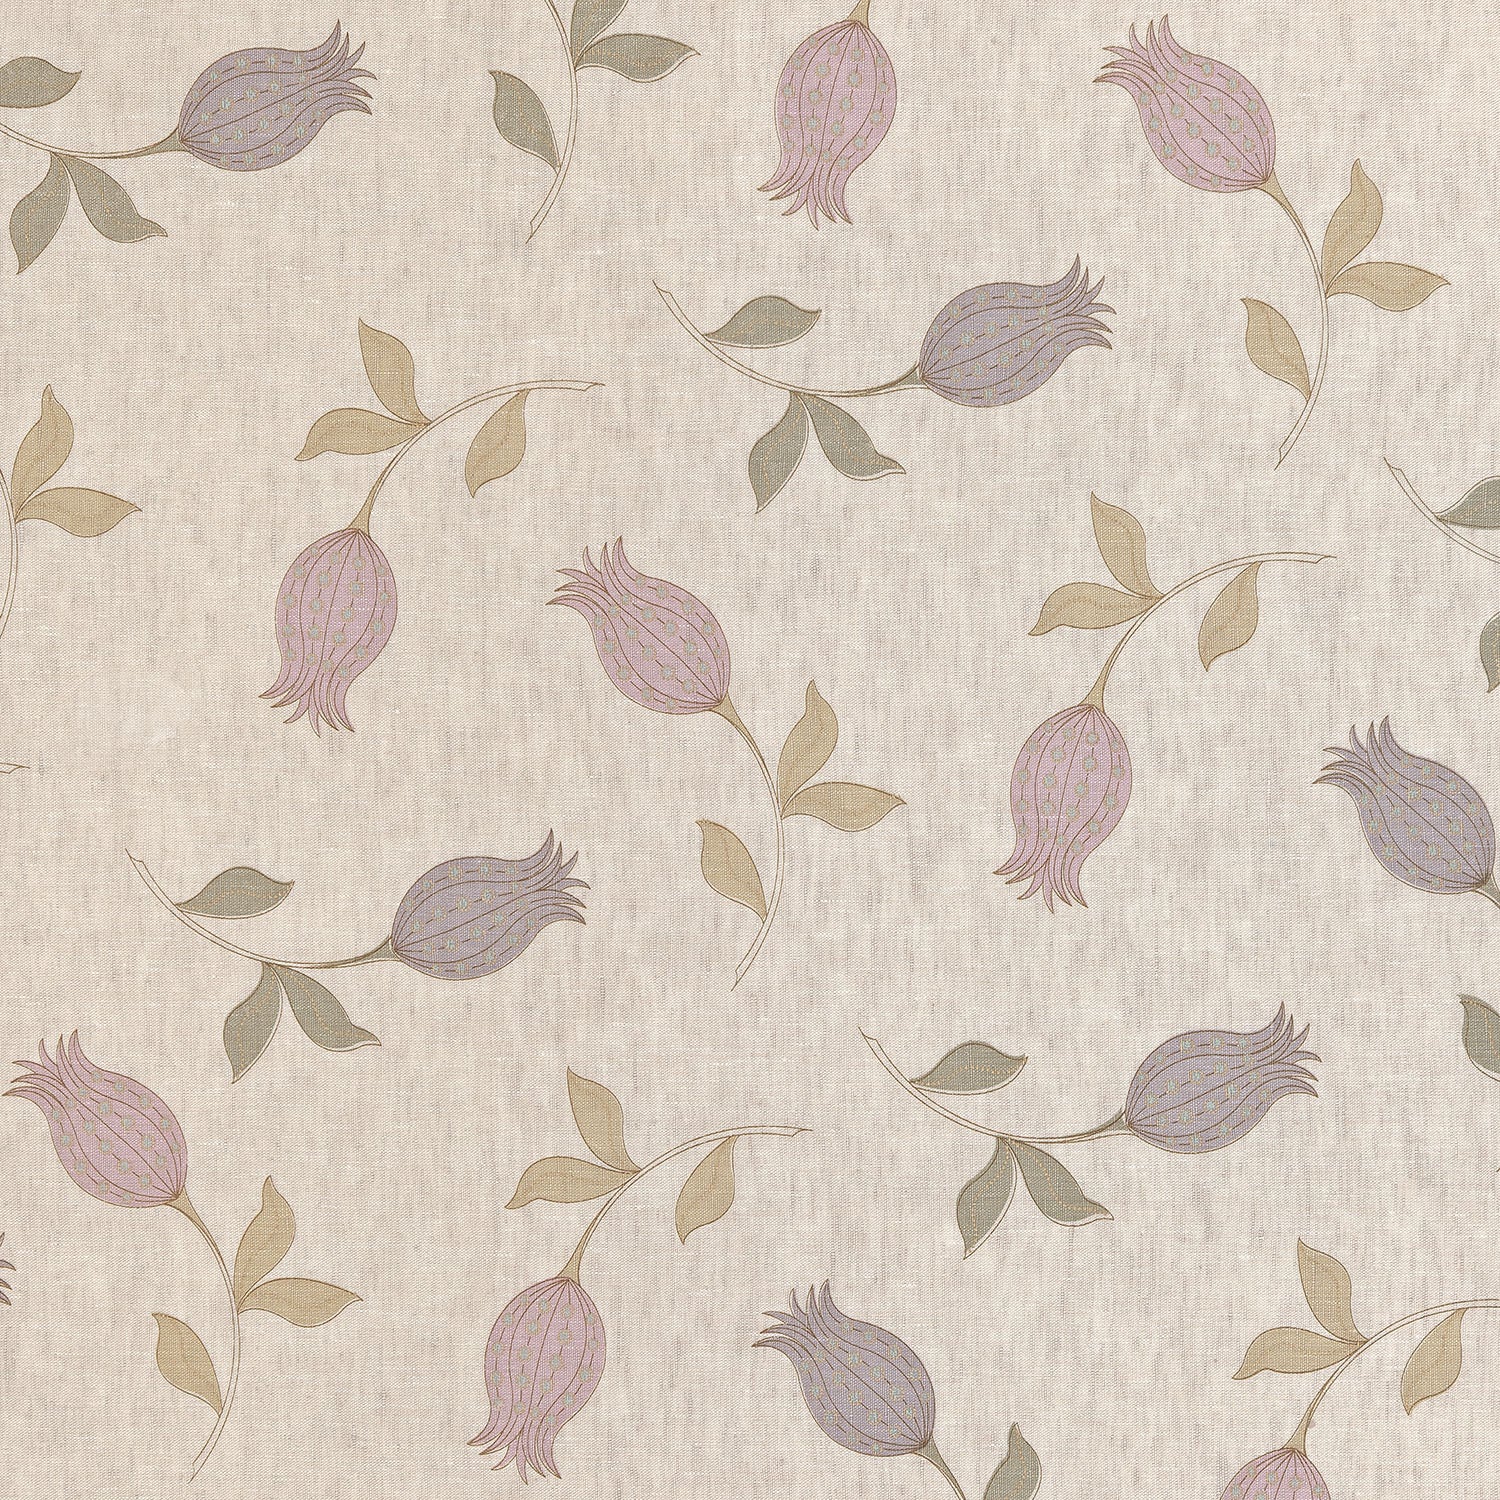 Detail of fabric with a small-scale tulip print in shades of purple and tan on a cream field.